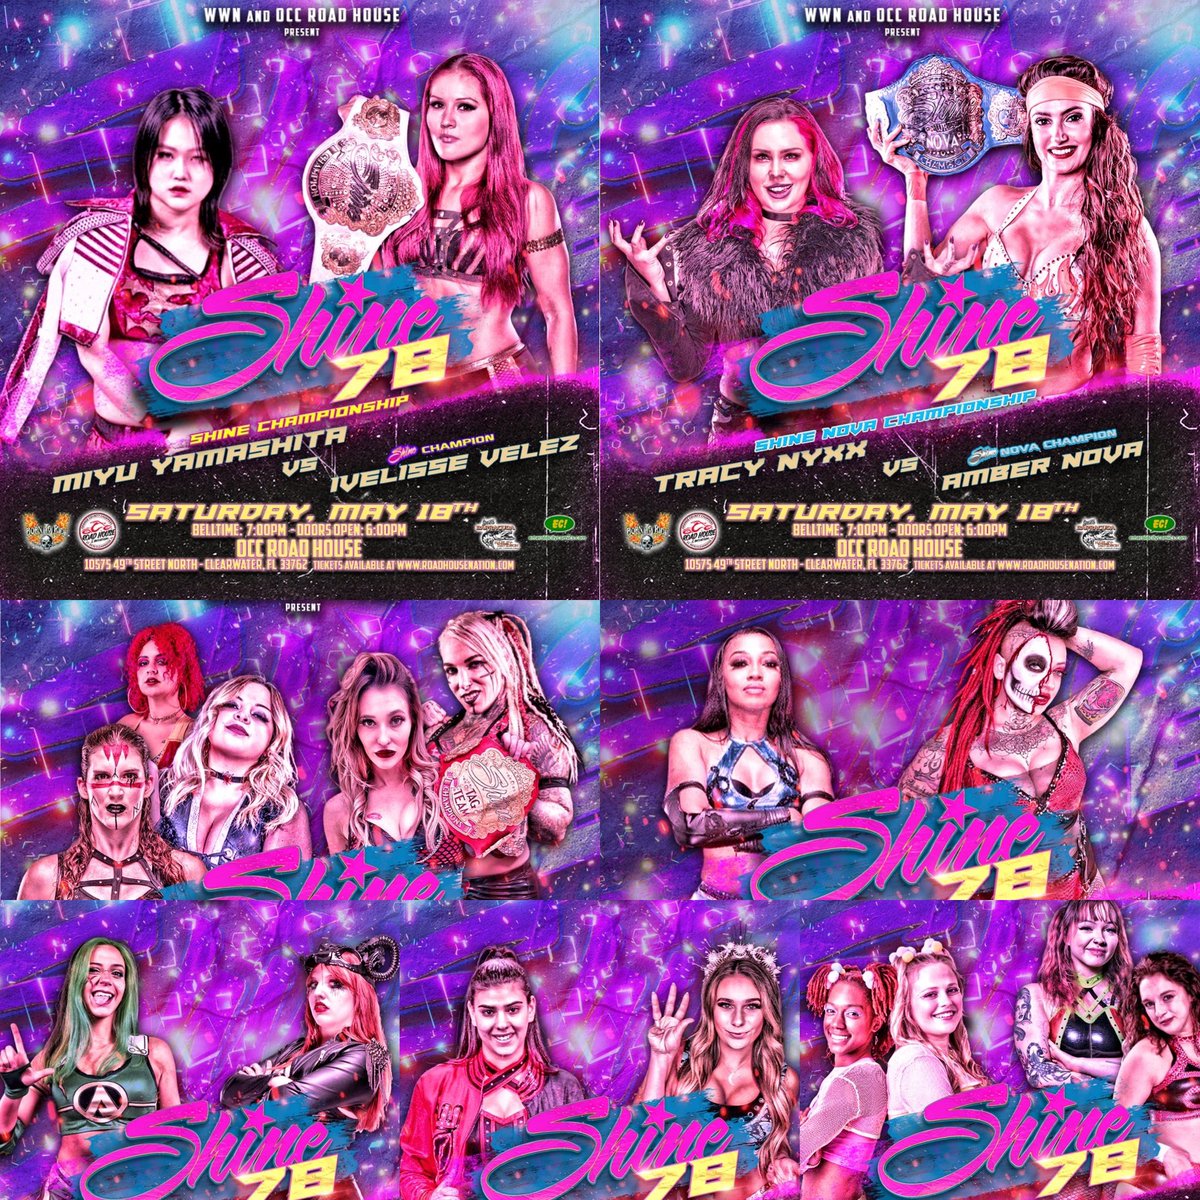 WWN & OCC Road House Nation present SHINE 78 Saturday, May 18th, 2023 Doors Open: 6:00 PM Bell Time: 7:00 PM OCC Road House 10575 49th Street North Clearwater, FL 33762 Tickets available at shop.occroadhouse.com